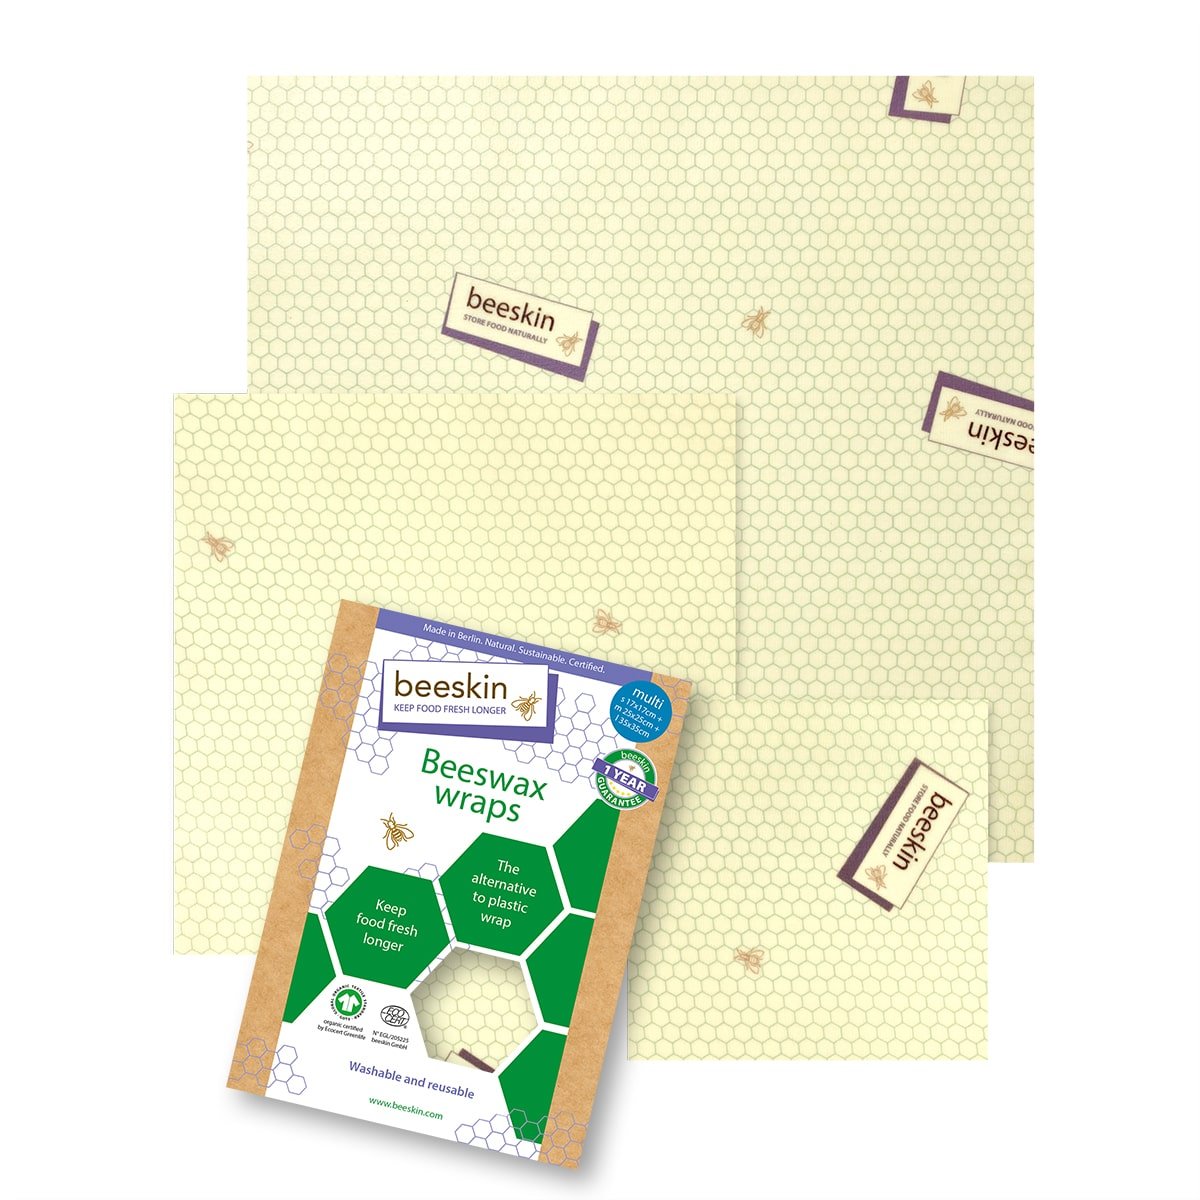 English packaging for beeskin beeswax wraps . Product multi in 3 different sizes: s, m, l